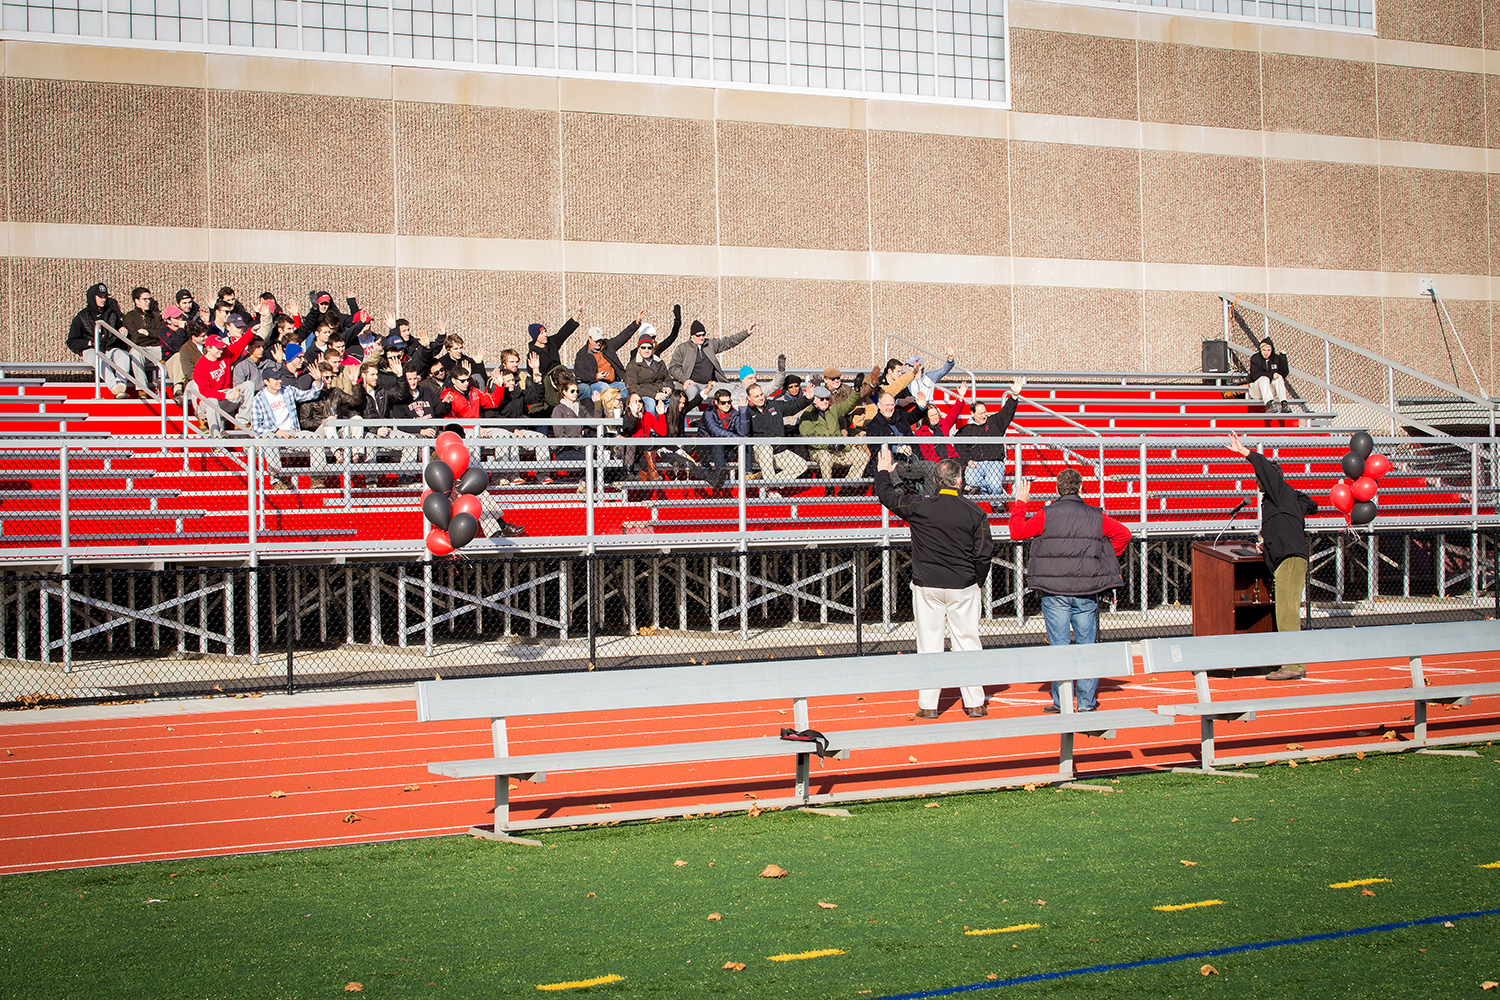 On Nov. 22, Wesleyan formally dedicated its new synthetic turf field, naming it Citrin Field, in honor of the Citrin family. The turf field is located to the south of the Freeman Athletic Center inside Andersen Track. 